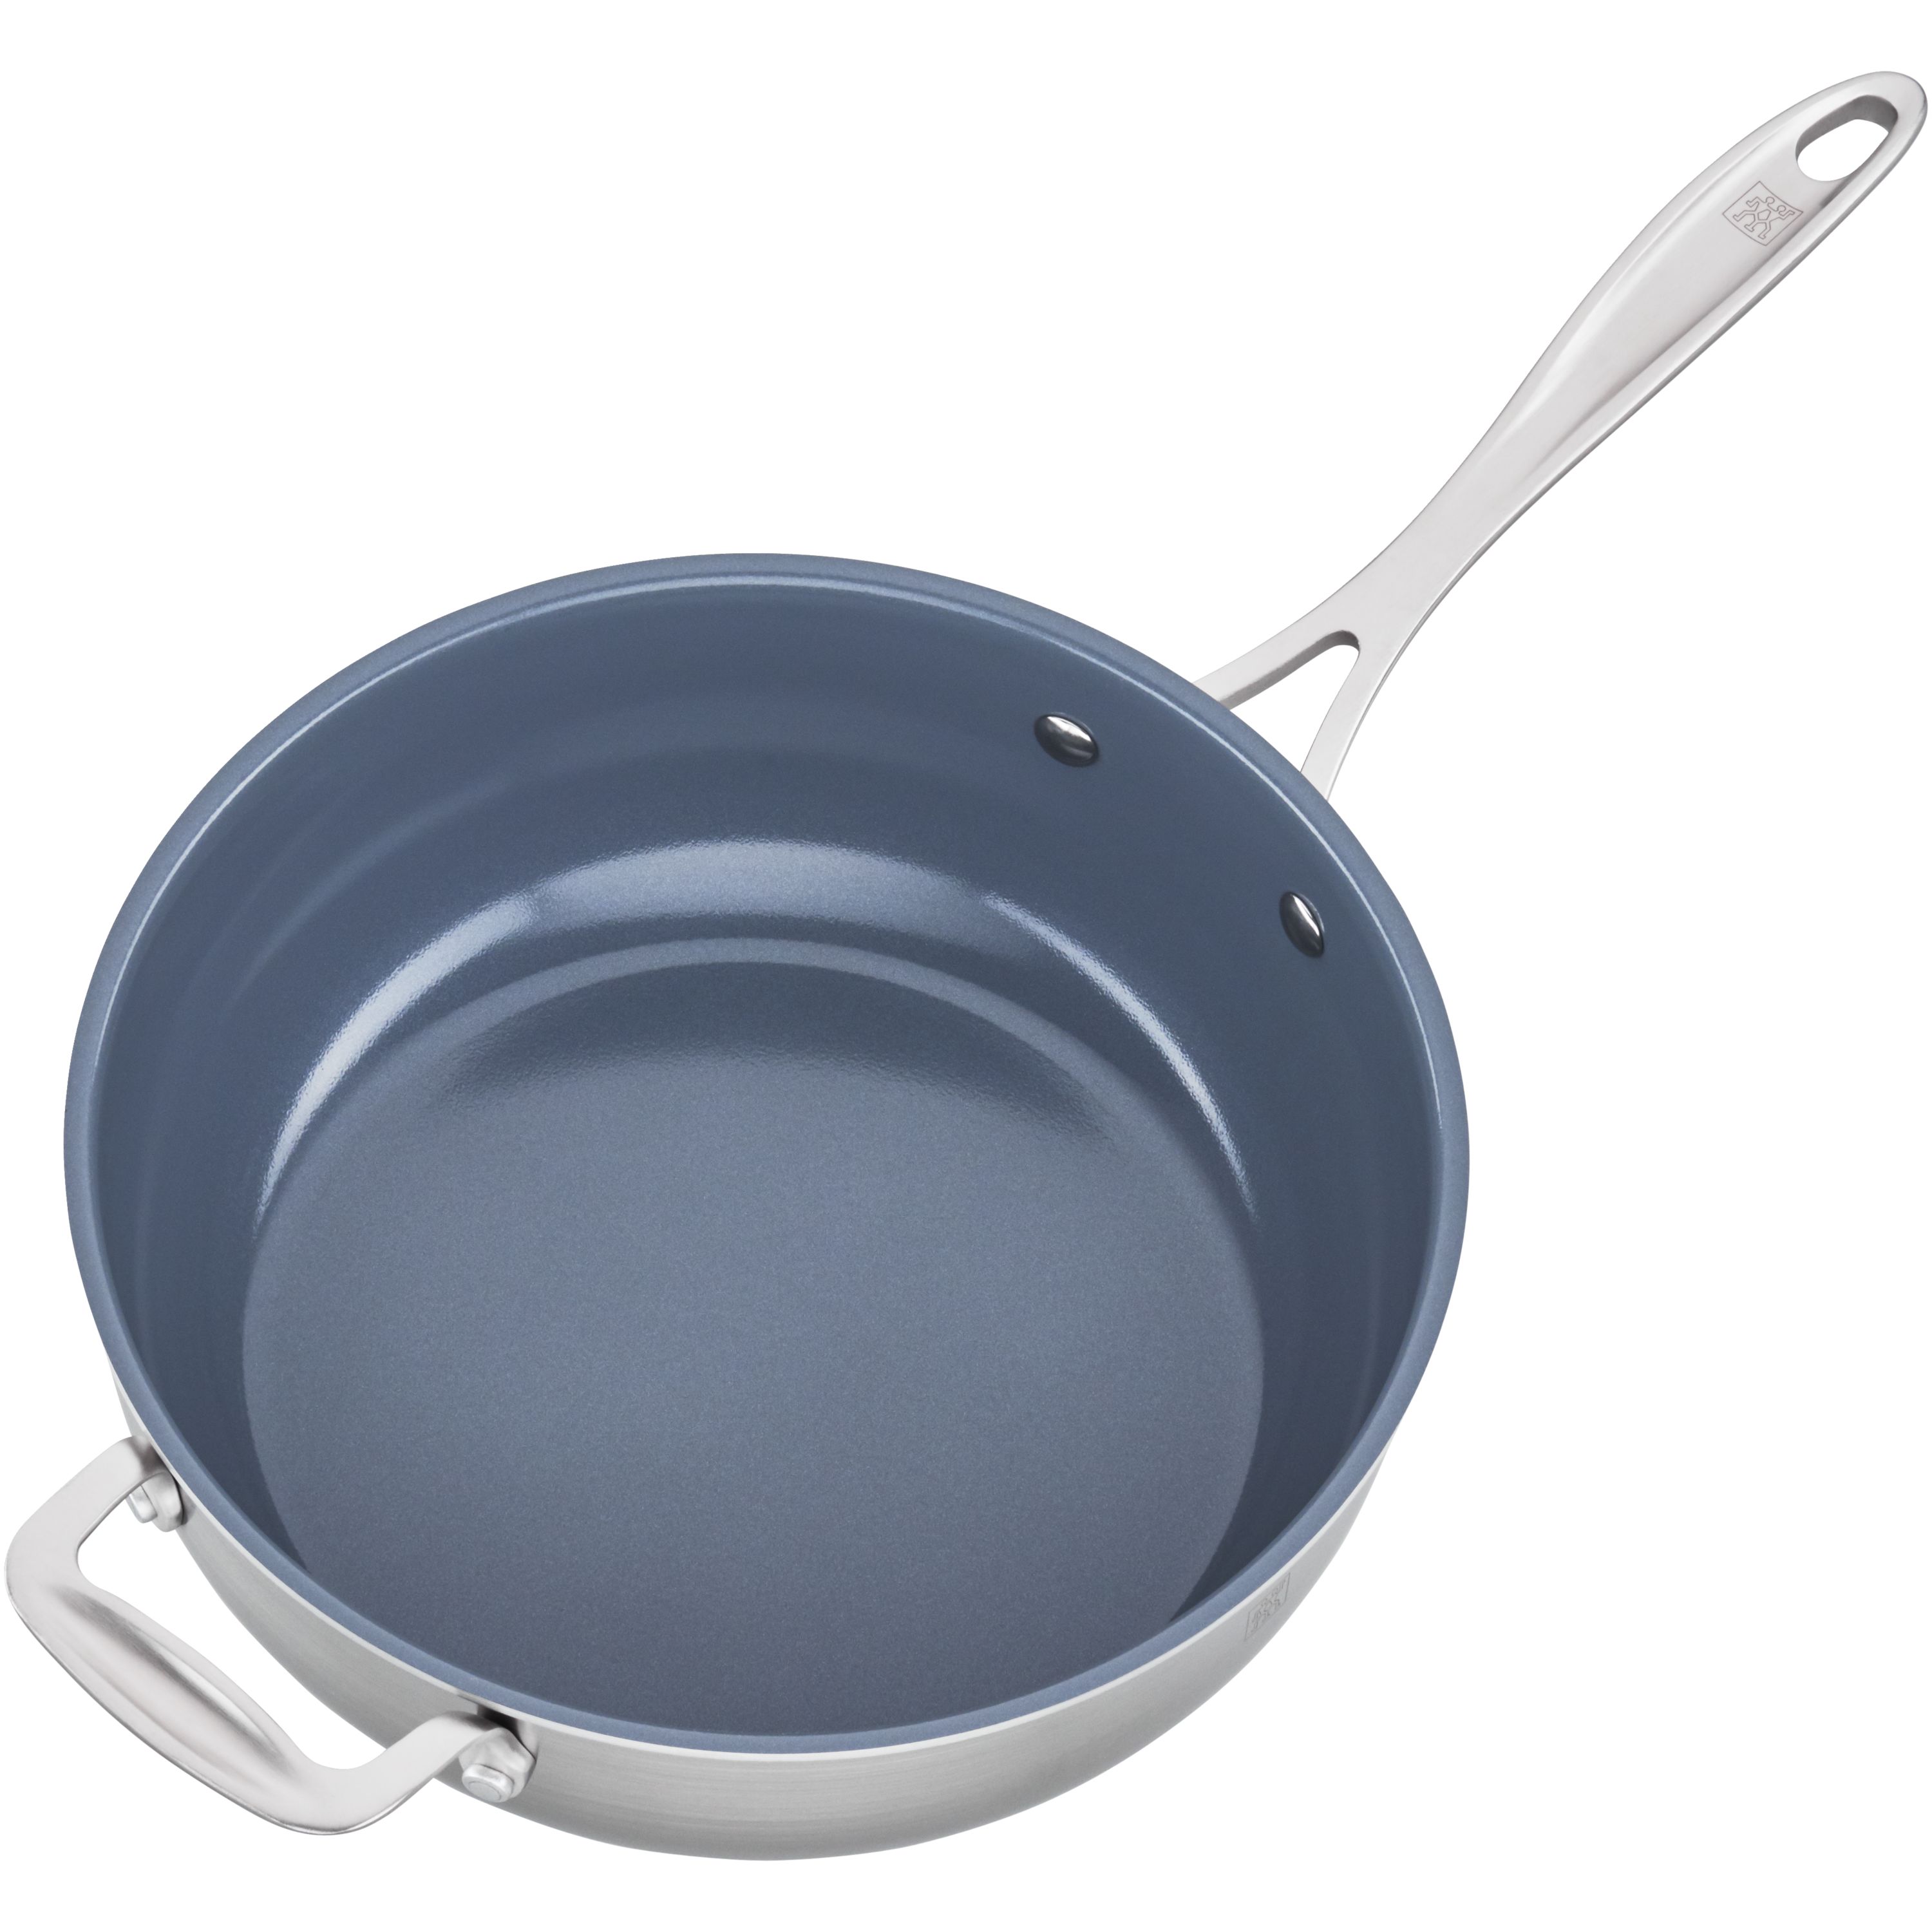 ZWILLING Spirit Stainless Sigma Clad, 8-inch, 18/10 Stainless Steel,  Ceramic, Frying pan